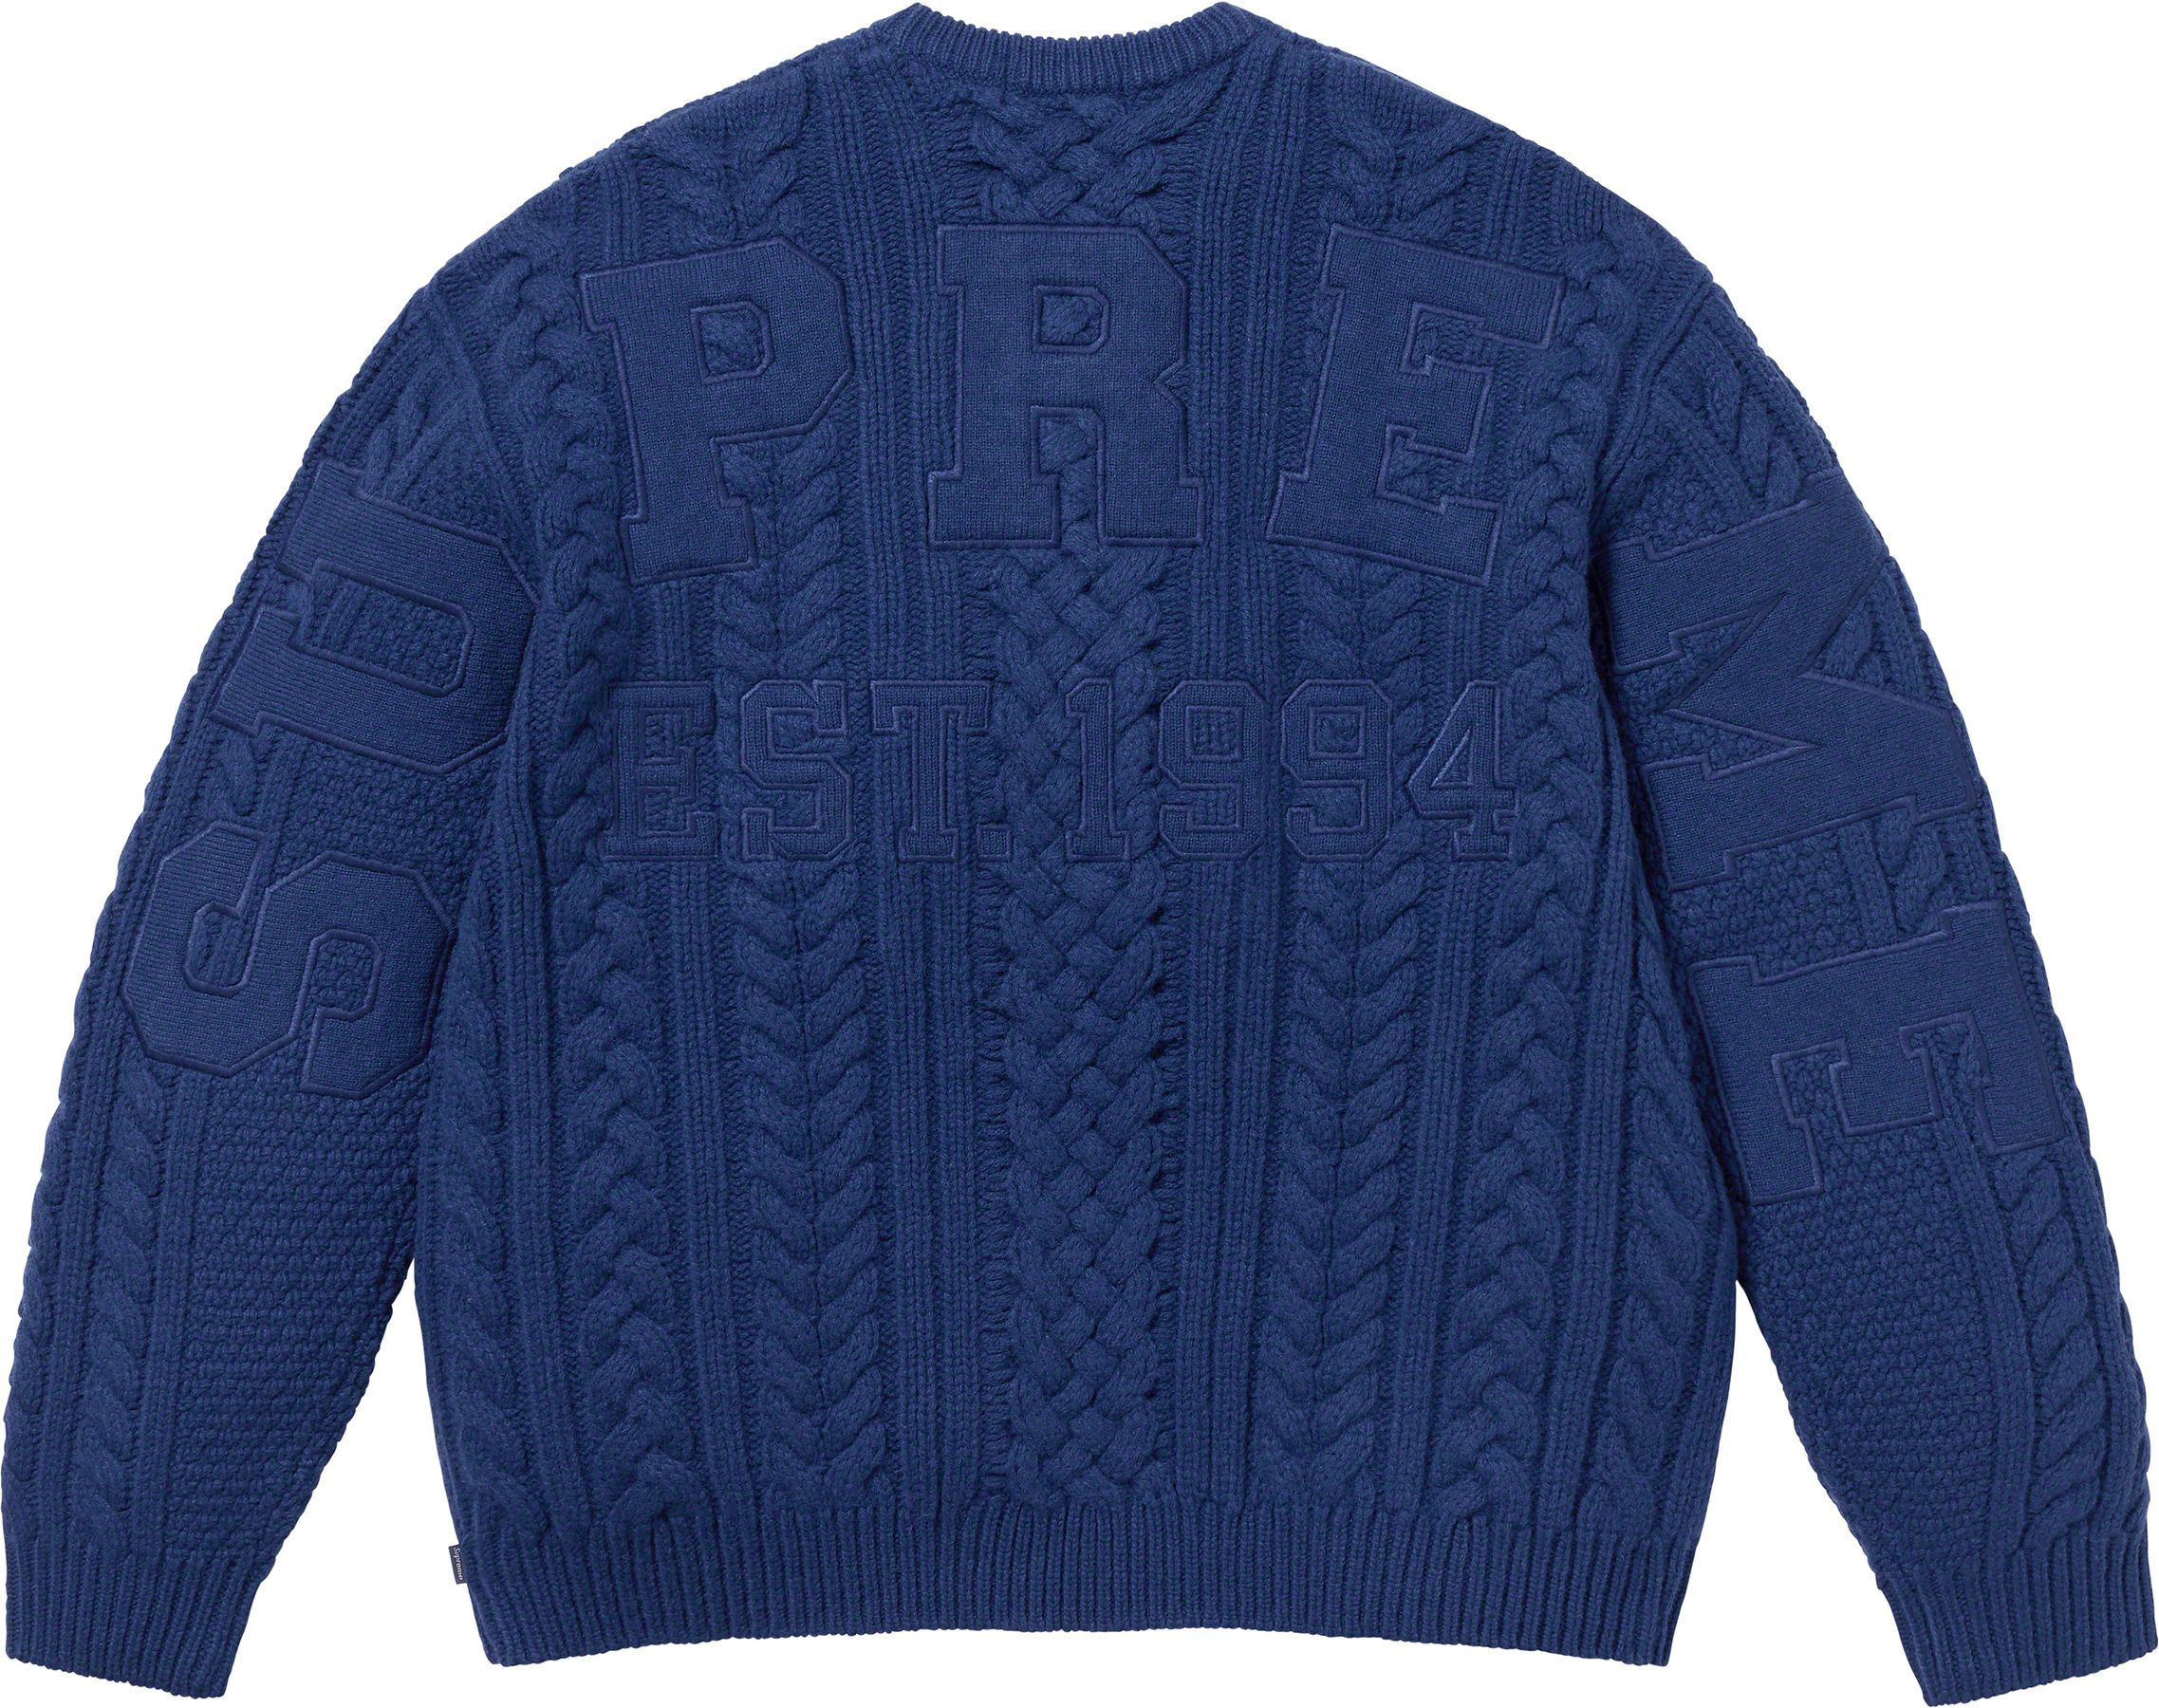 Small Box Ribbed Sweater - Fall/Winter 2023 Preview – Supreme